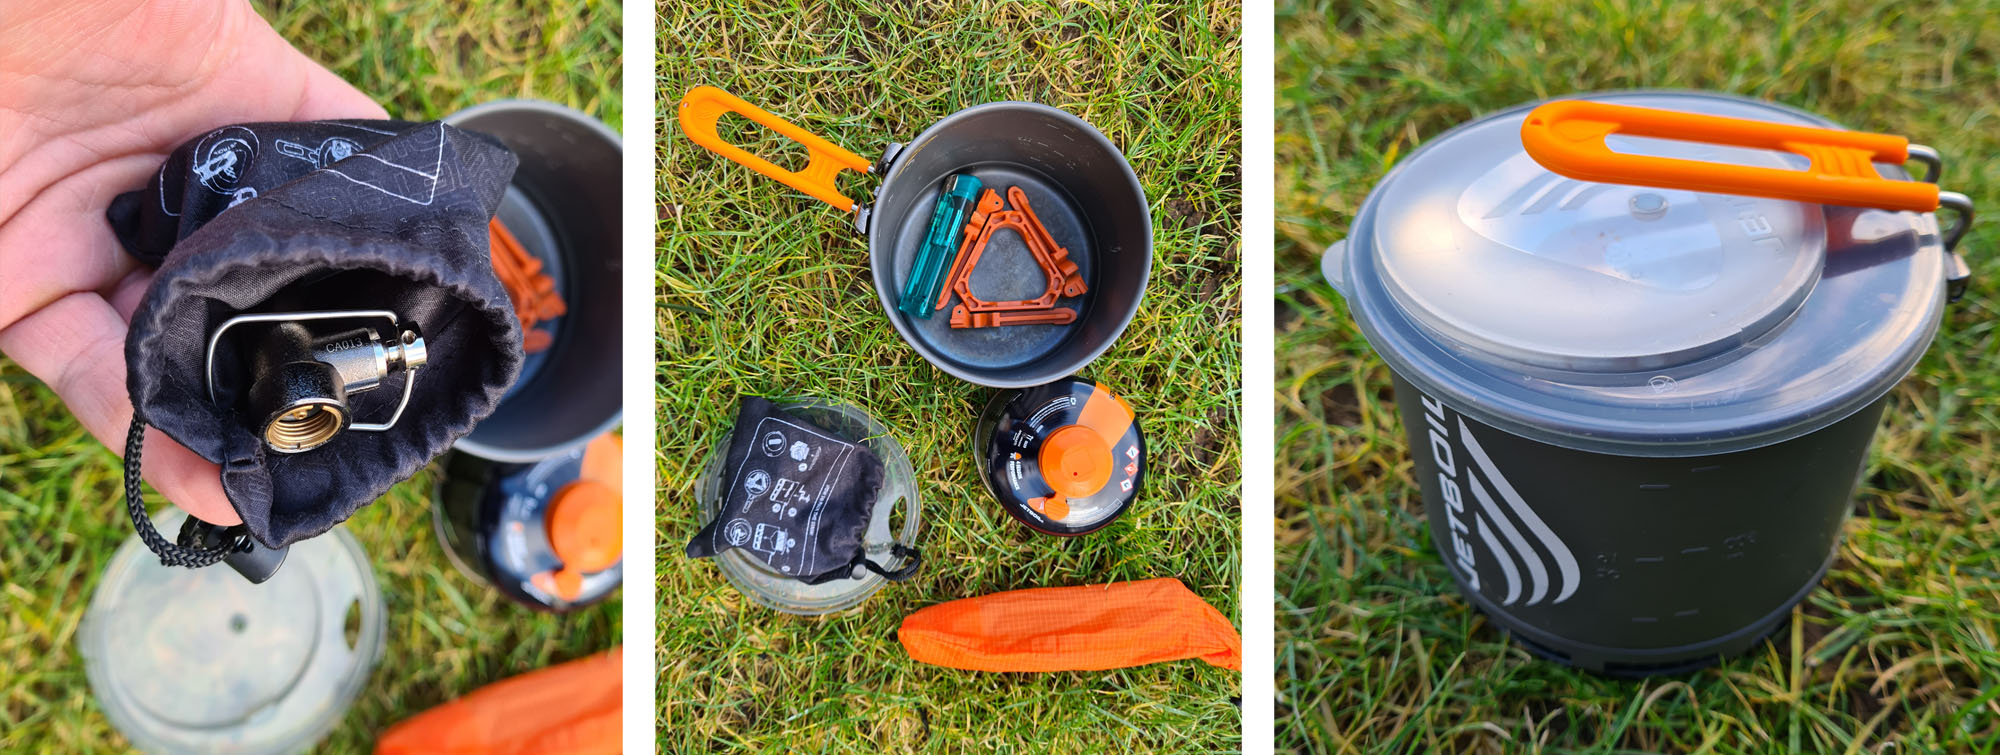 Jetboil Stash Stove Review - FarOut